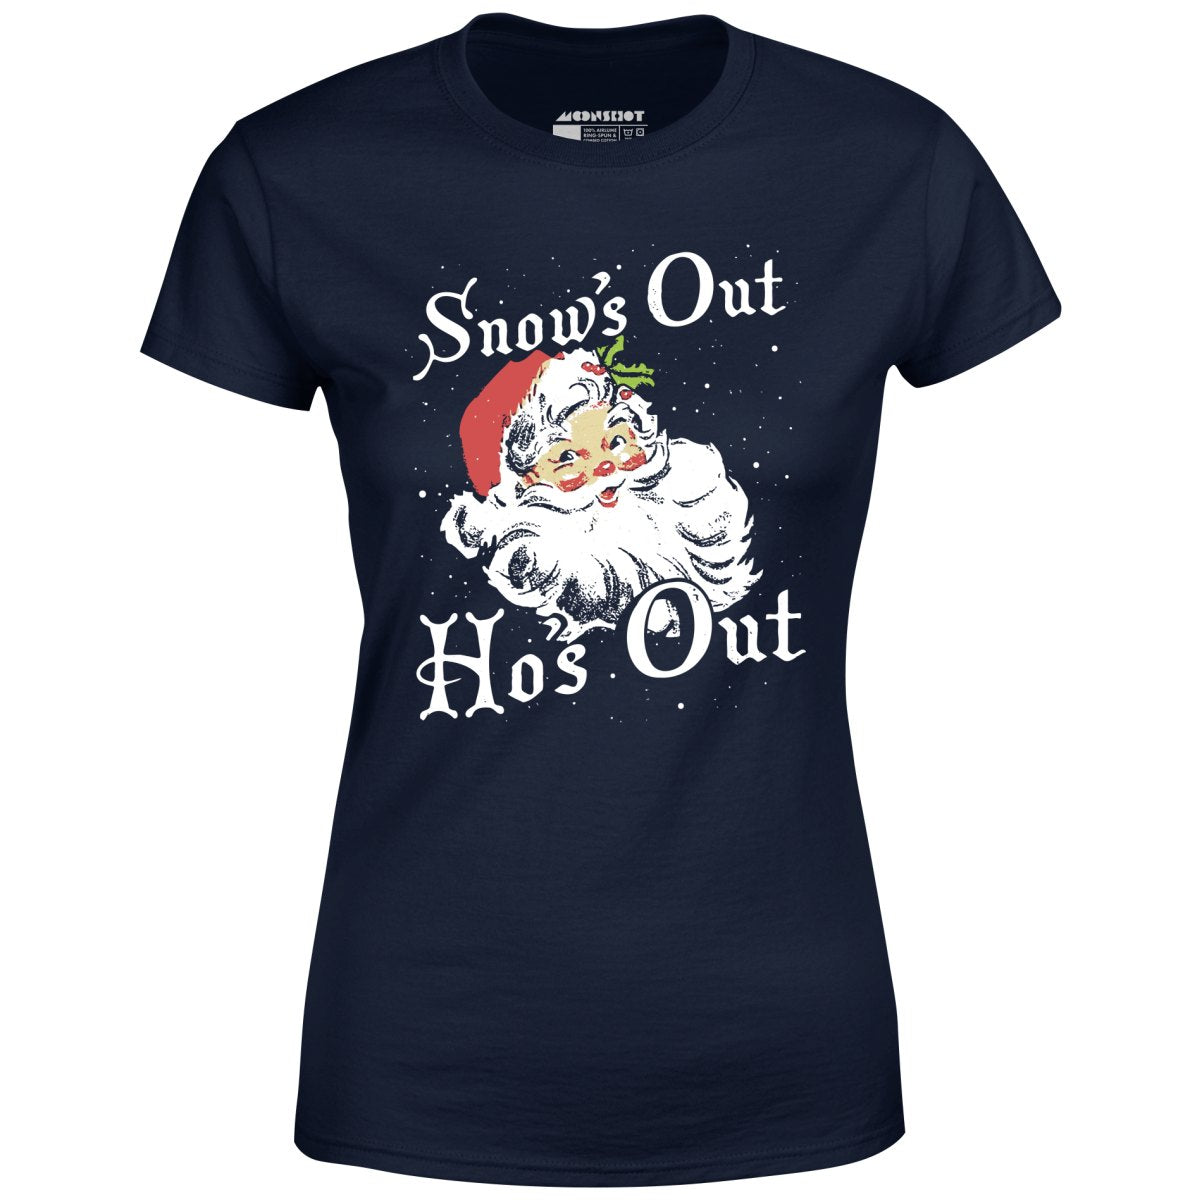 Snow's Out Ho's Out - Women's T-Shirt